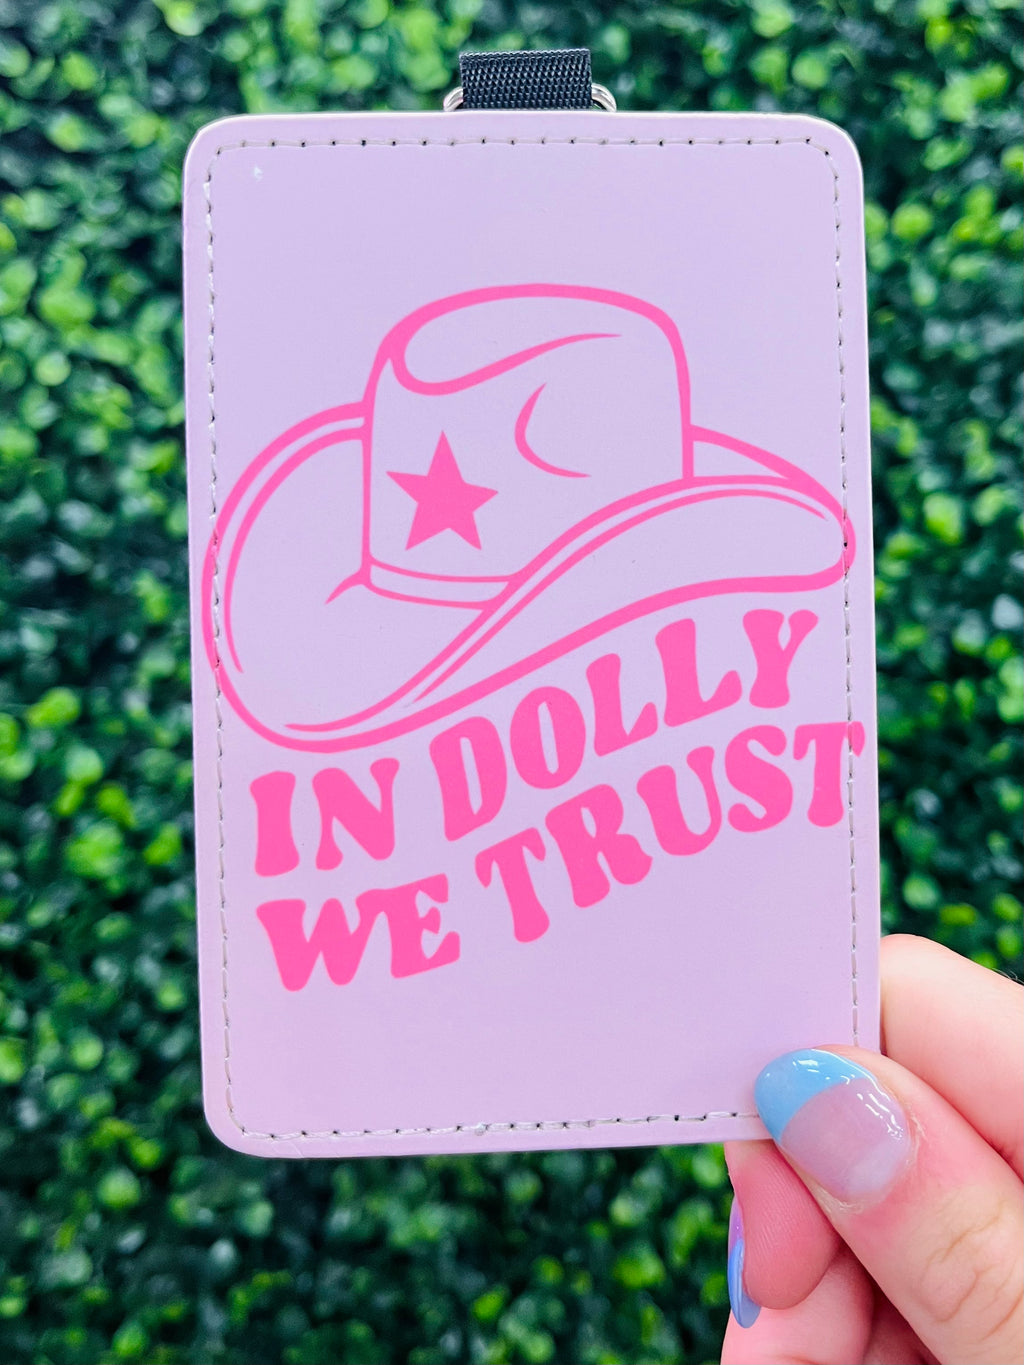 Are you looking for a way to keep your cards safe and express your love for Dolly Parton? Look no further: the In Dolly We Trust Card Holder Keychain is here! This stylish keychain with the trusty catchphrase is the perfect gift for any Dolly fan. So don't delay, trust in Dolly and get yours today!